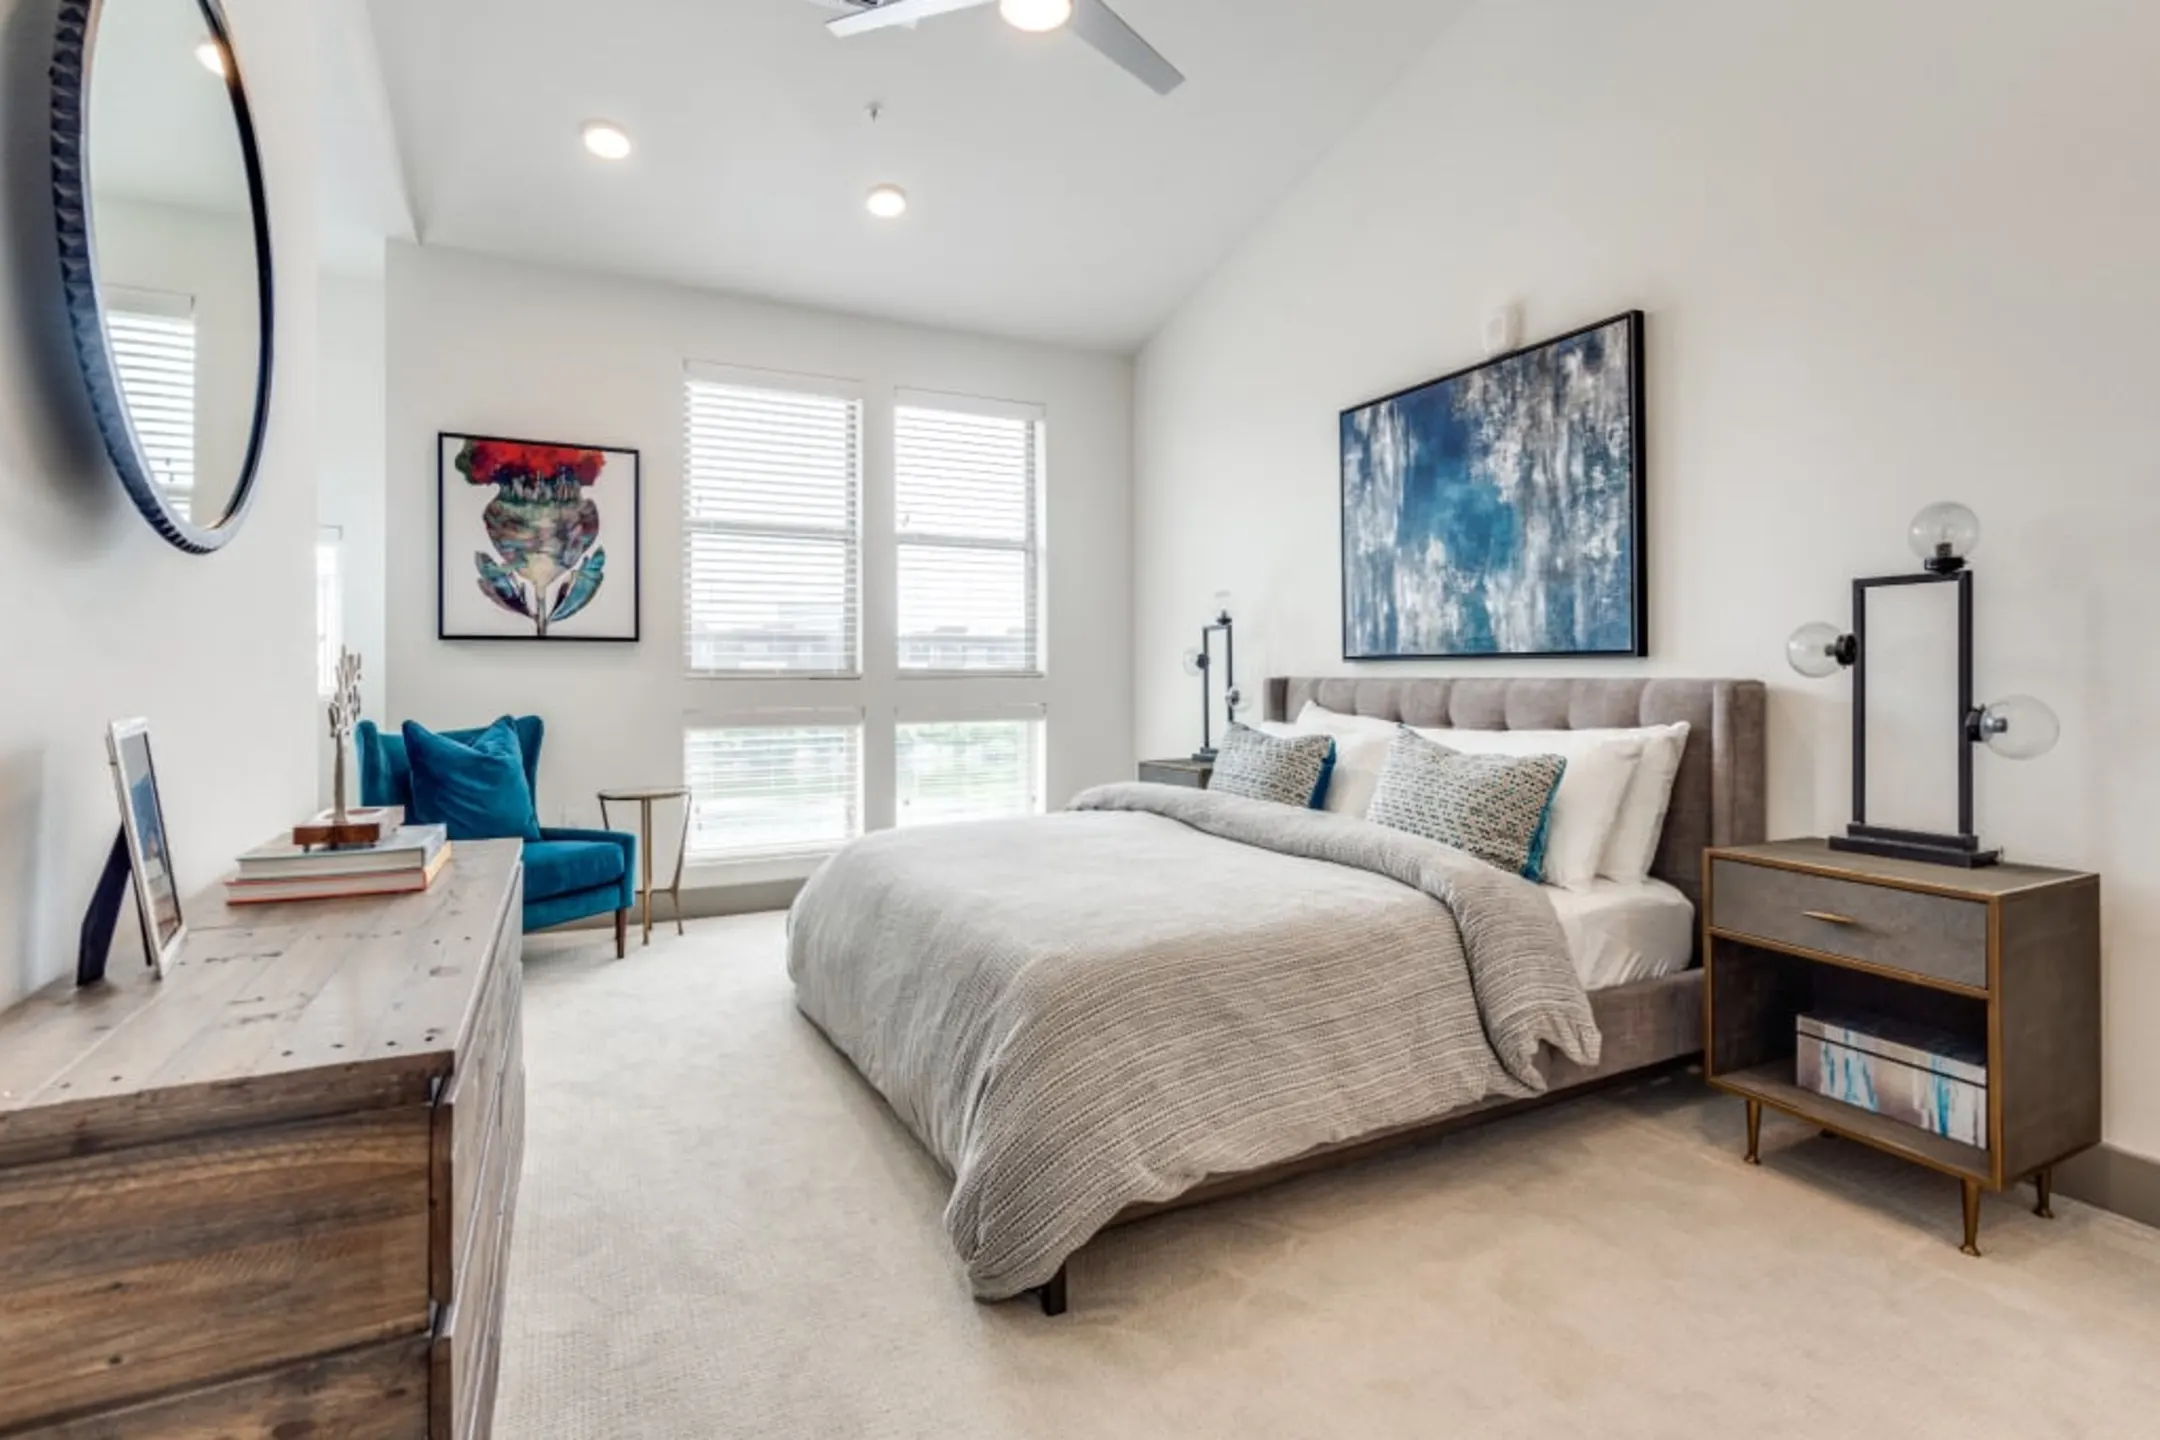 Bedroom - Midway Row House - Farmers Branch, TX